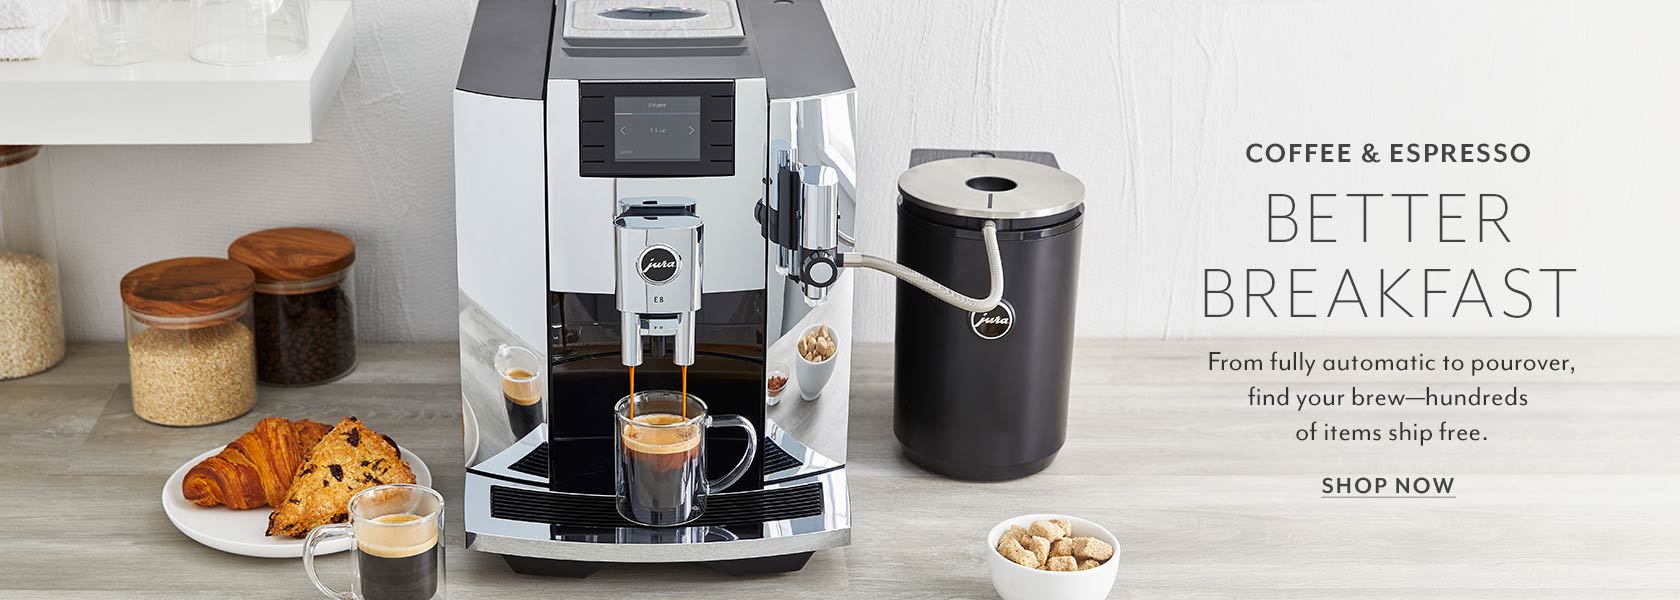 Coffee & Espresso. Better Breakfast. From fully automatic to pourover, find your brew-hundreds of items ship free.